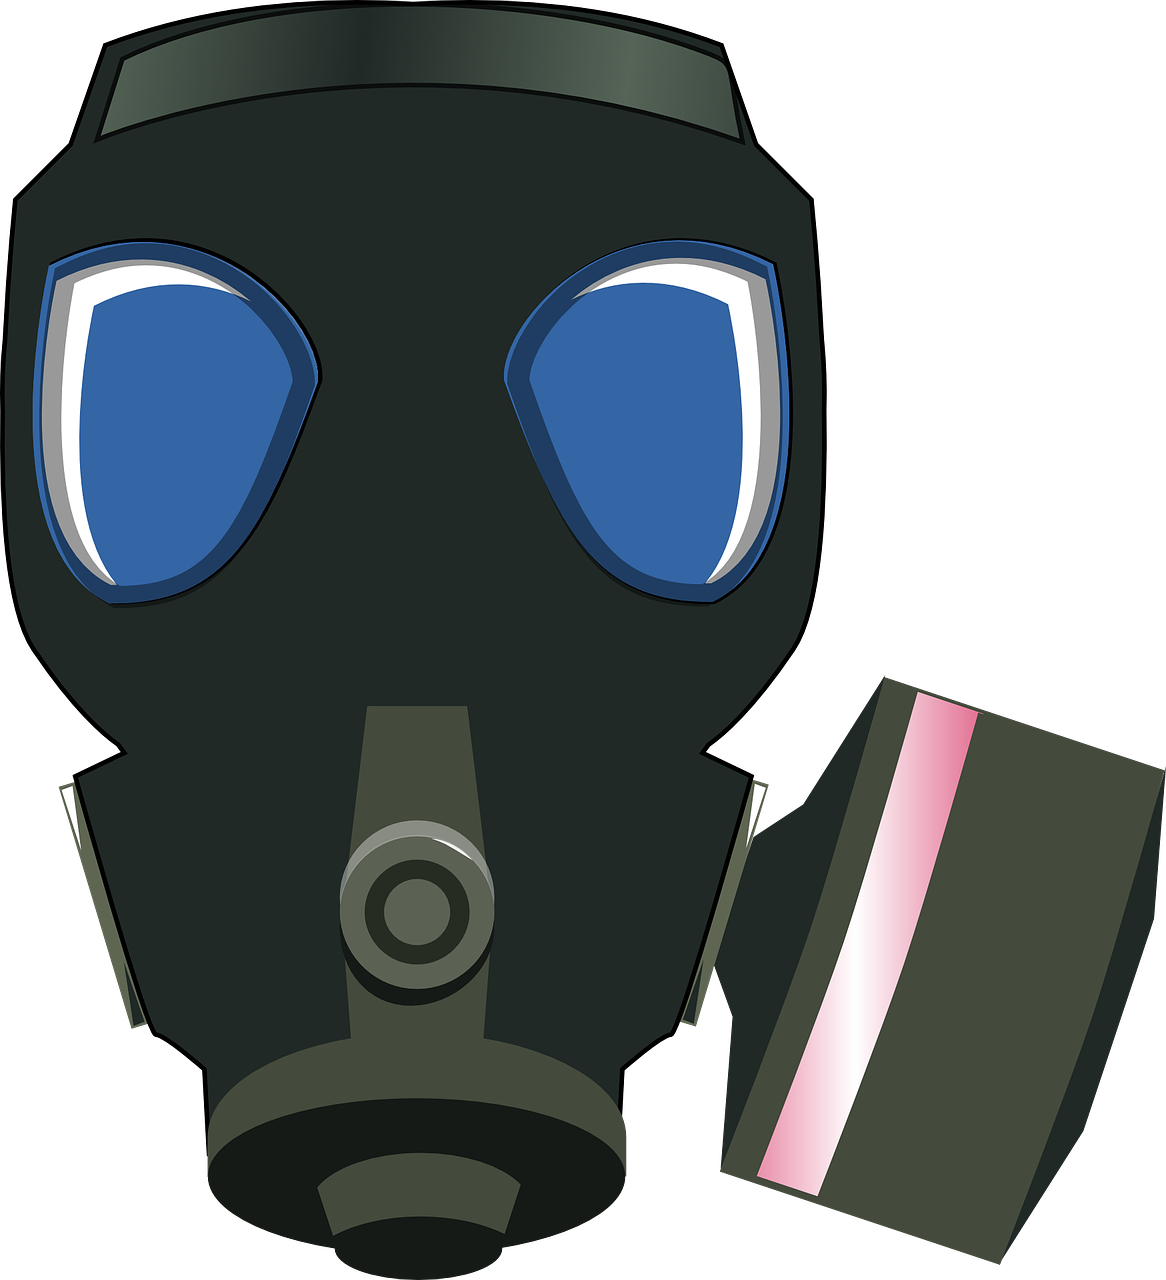 A Black Gas Mask With Blue Eyes